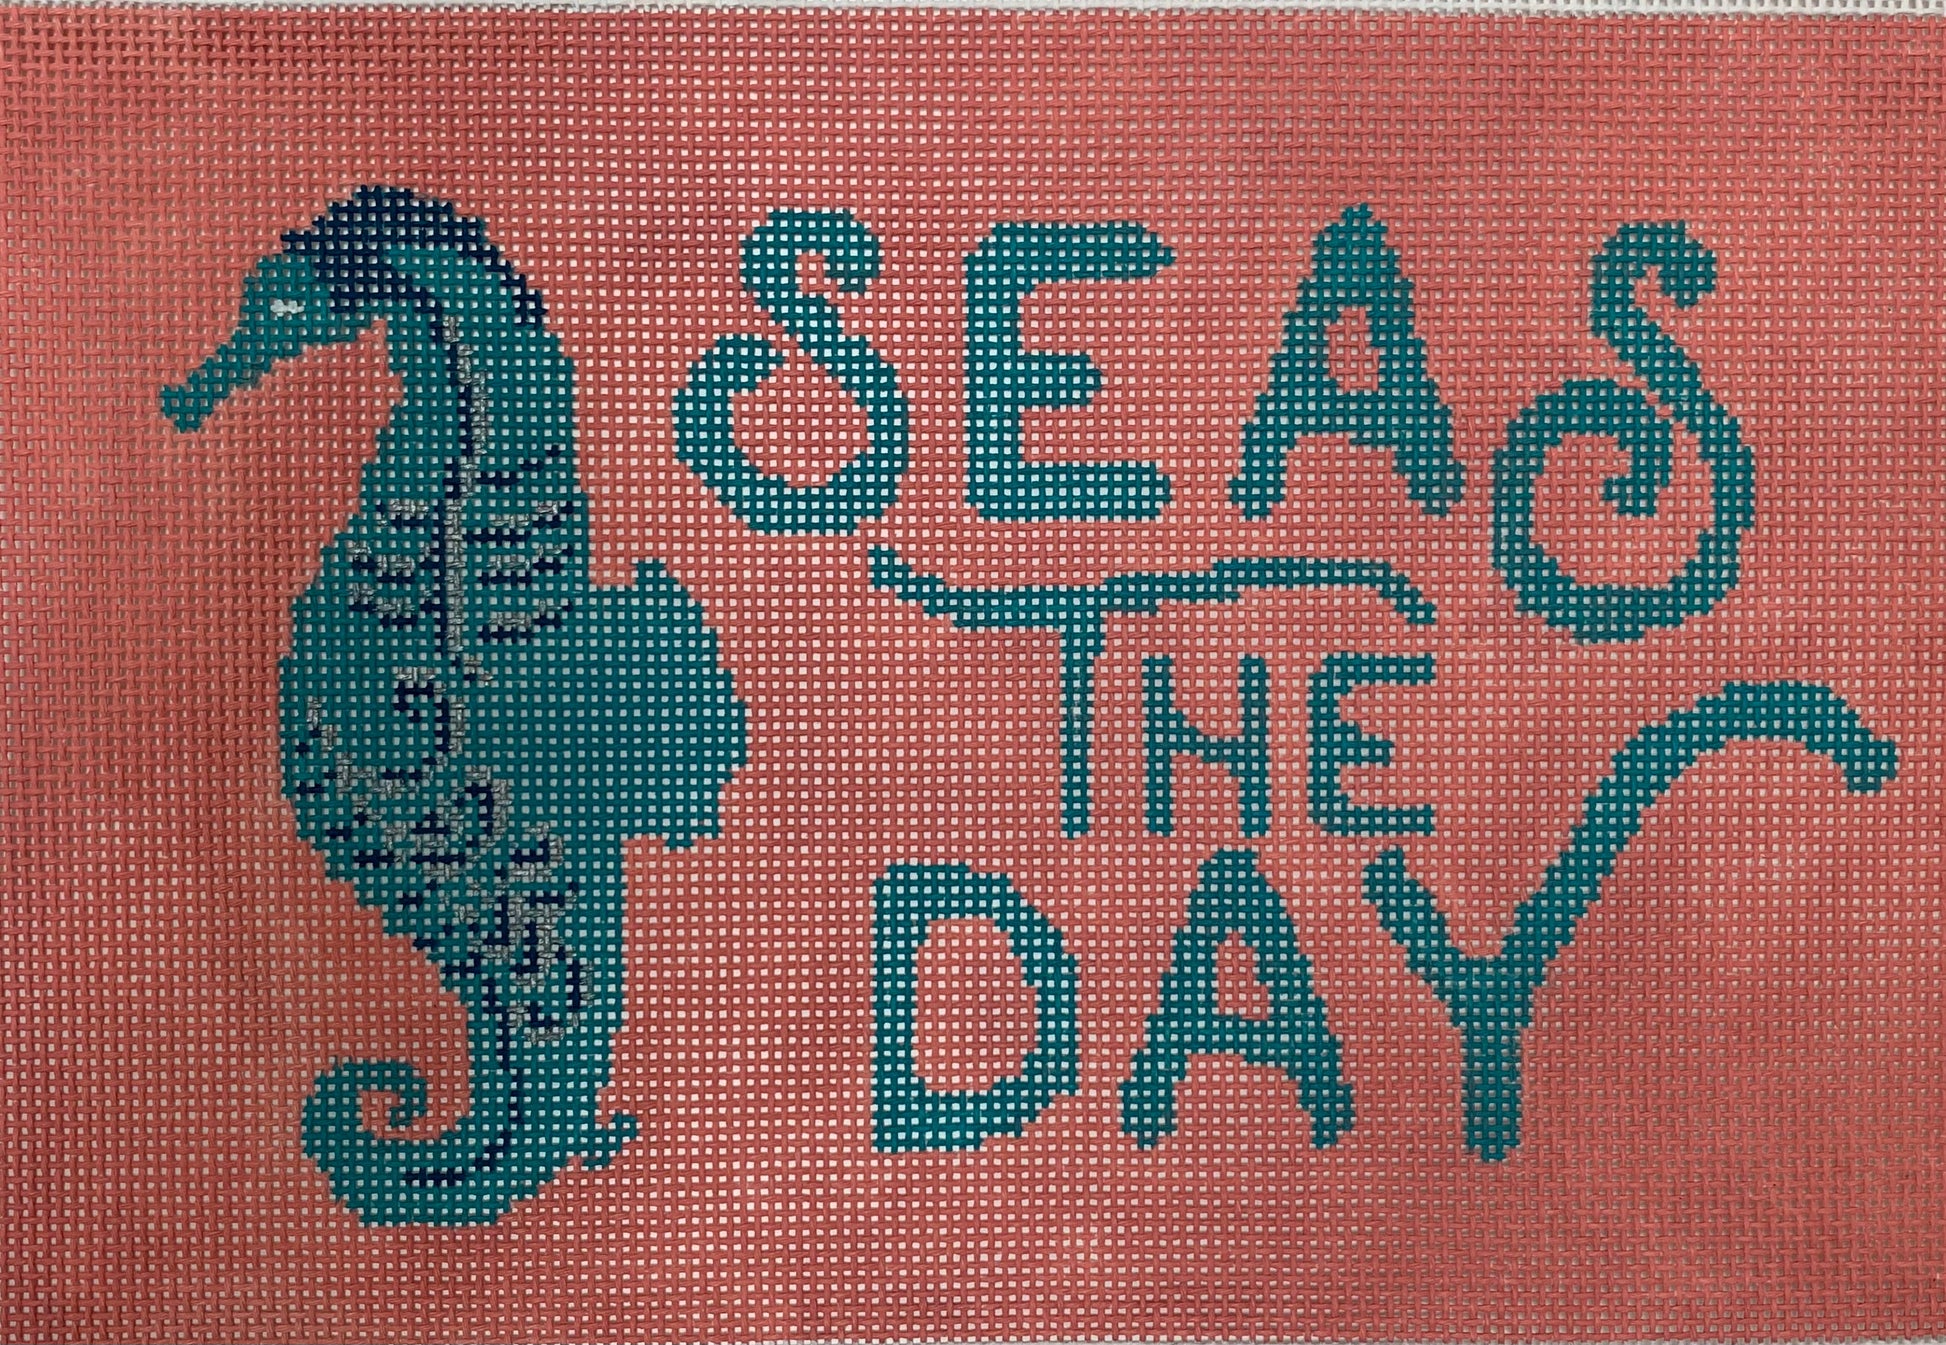 Seas The Day on Red Needlecraft Canvas